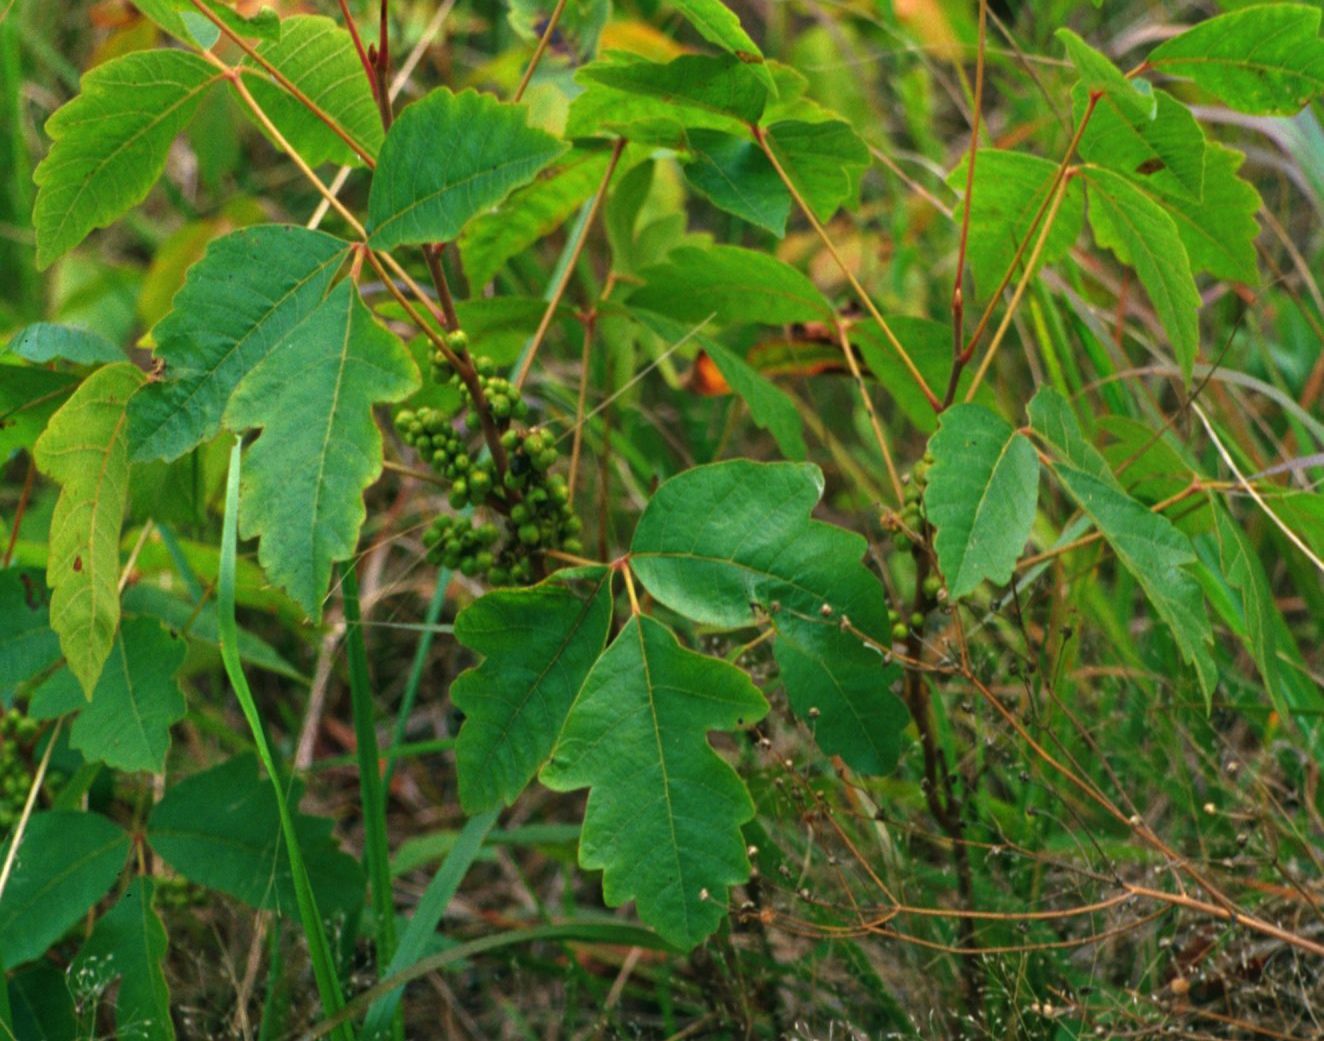 Poison oak looks similar to poison ivy, but the teeth along the edges of the leaflets are more rounded, leaves often are not as shiny, and the form is more shrub-like (photo by John Byrd, bugwood.org).